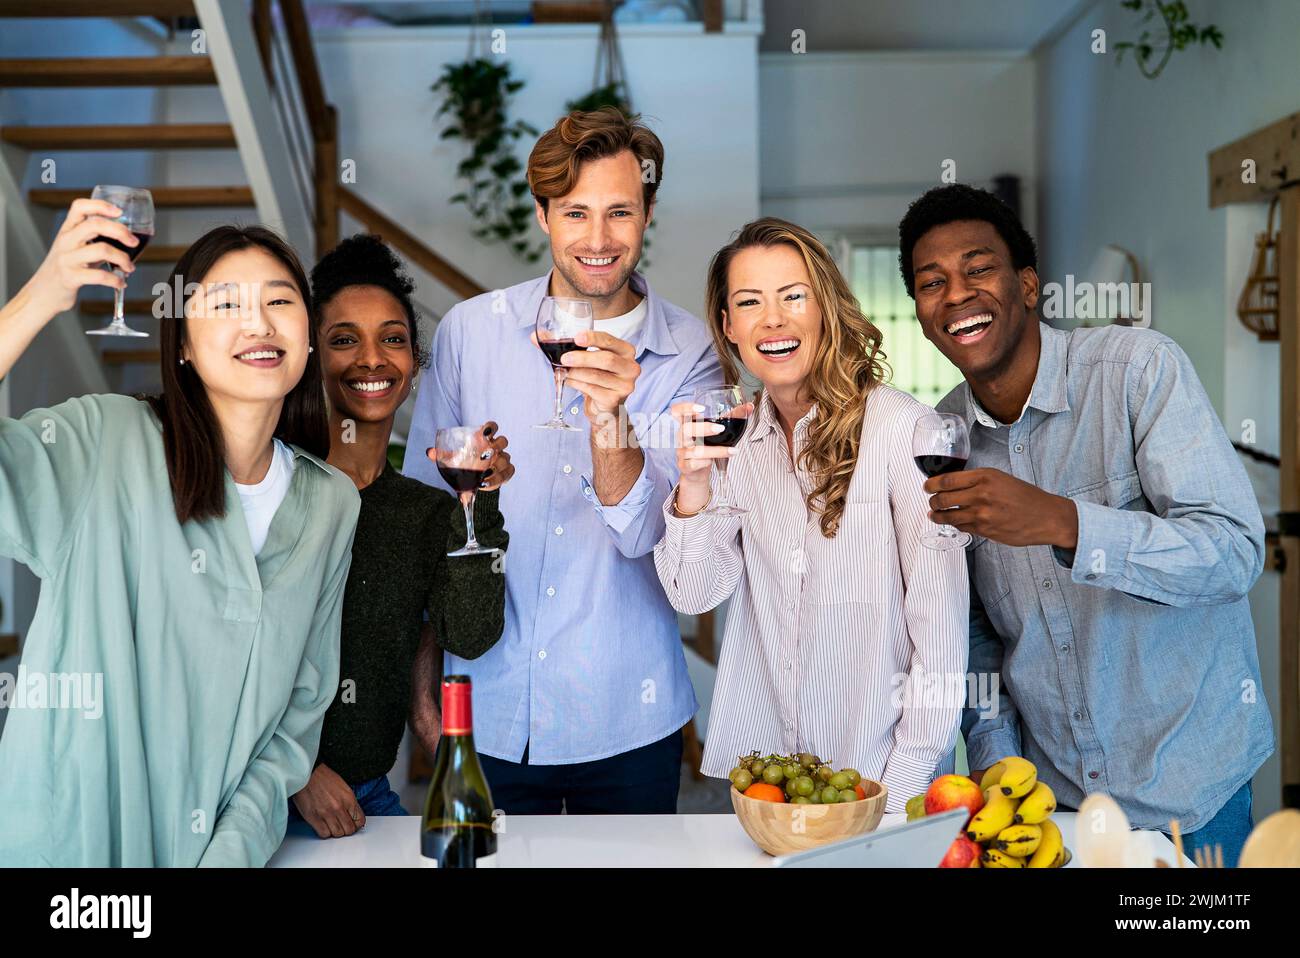 Group of friends looking at the camera toasting with wineglasses standing in kitchen Stock Photo